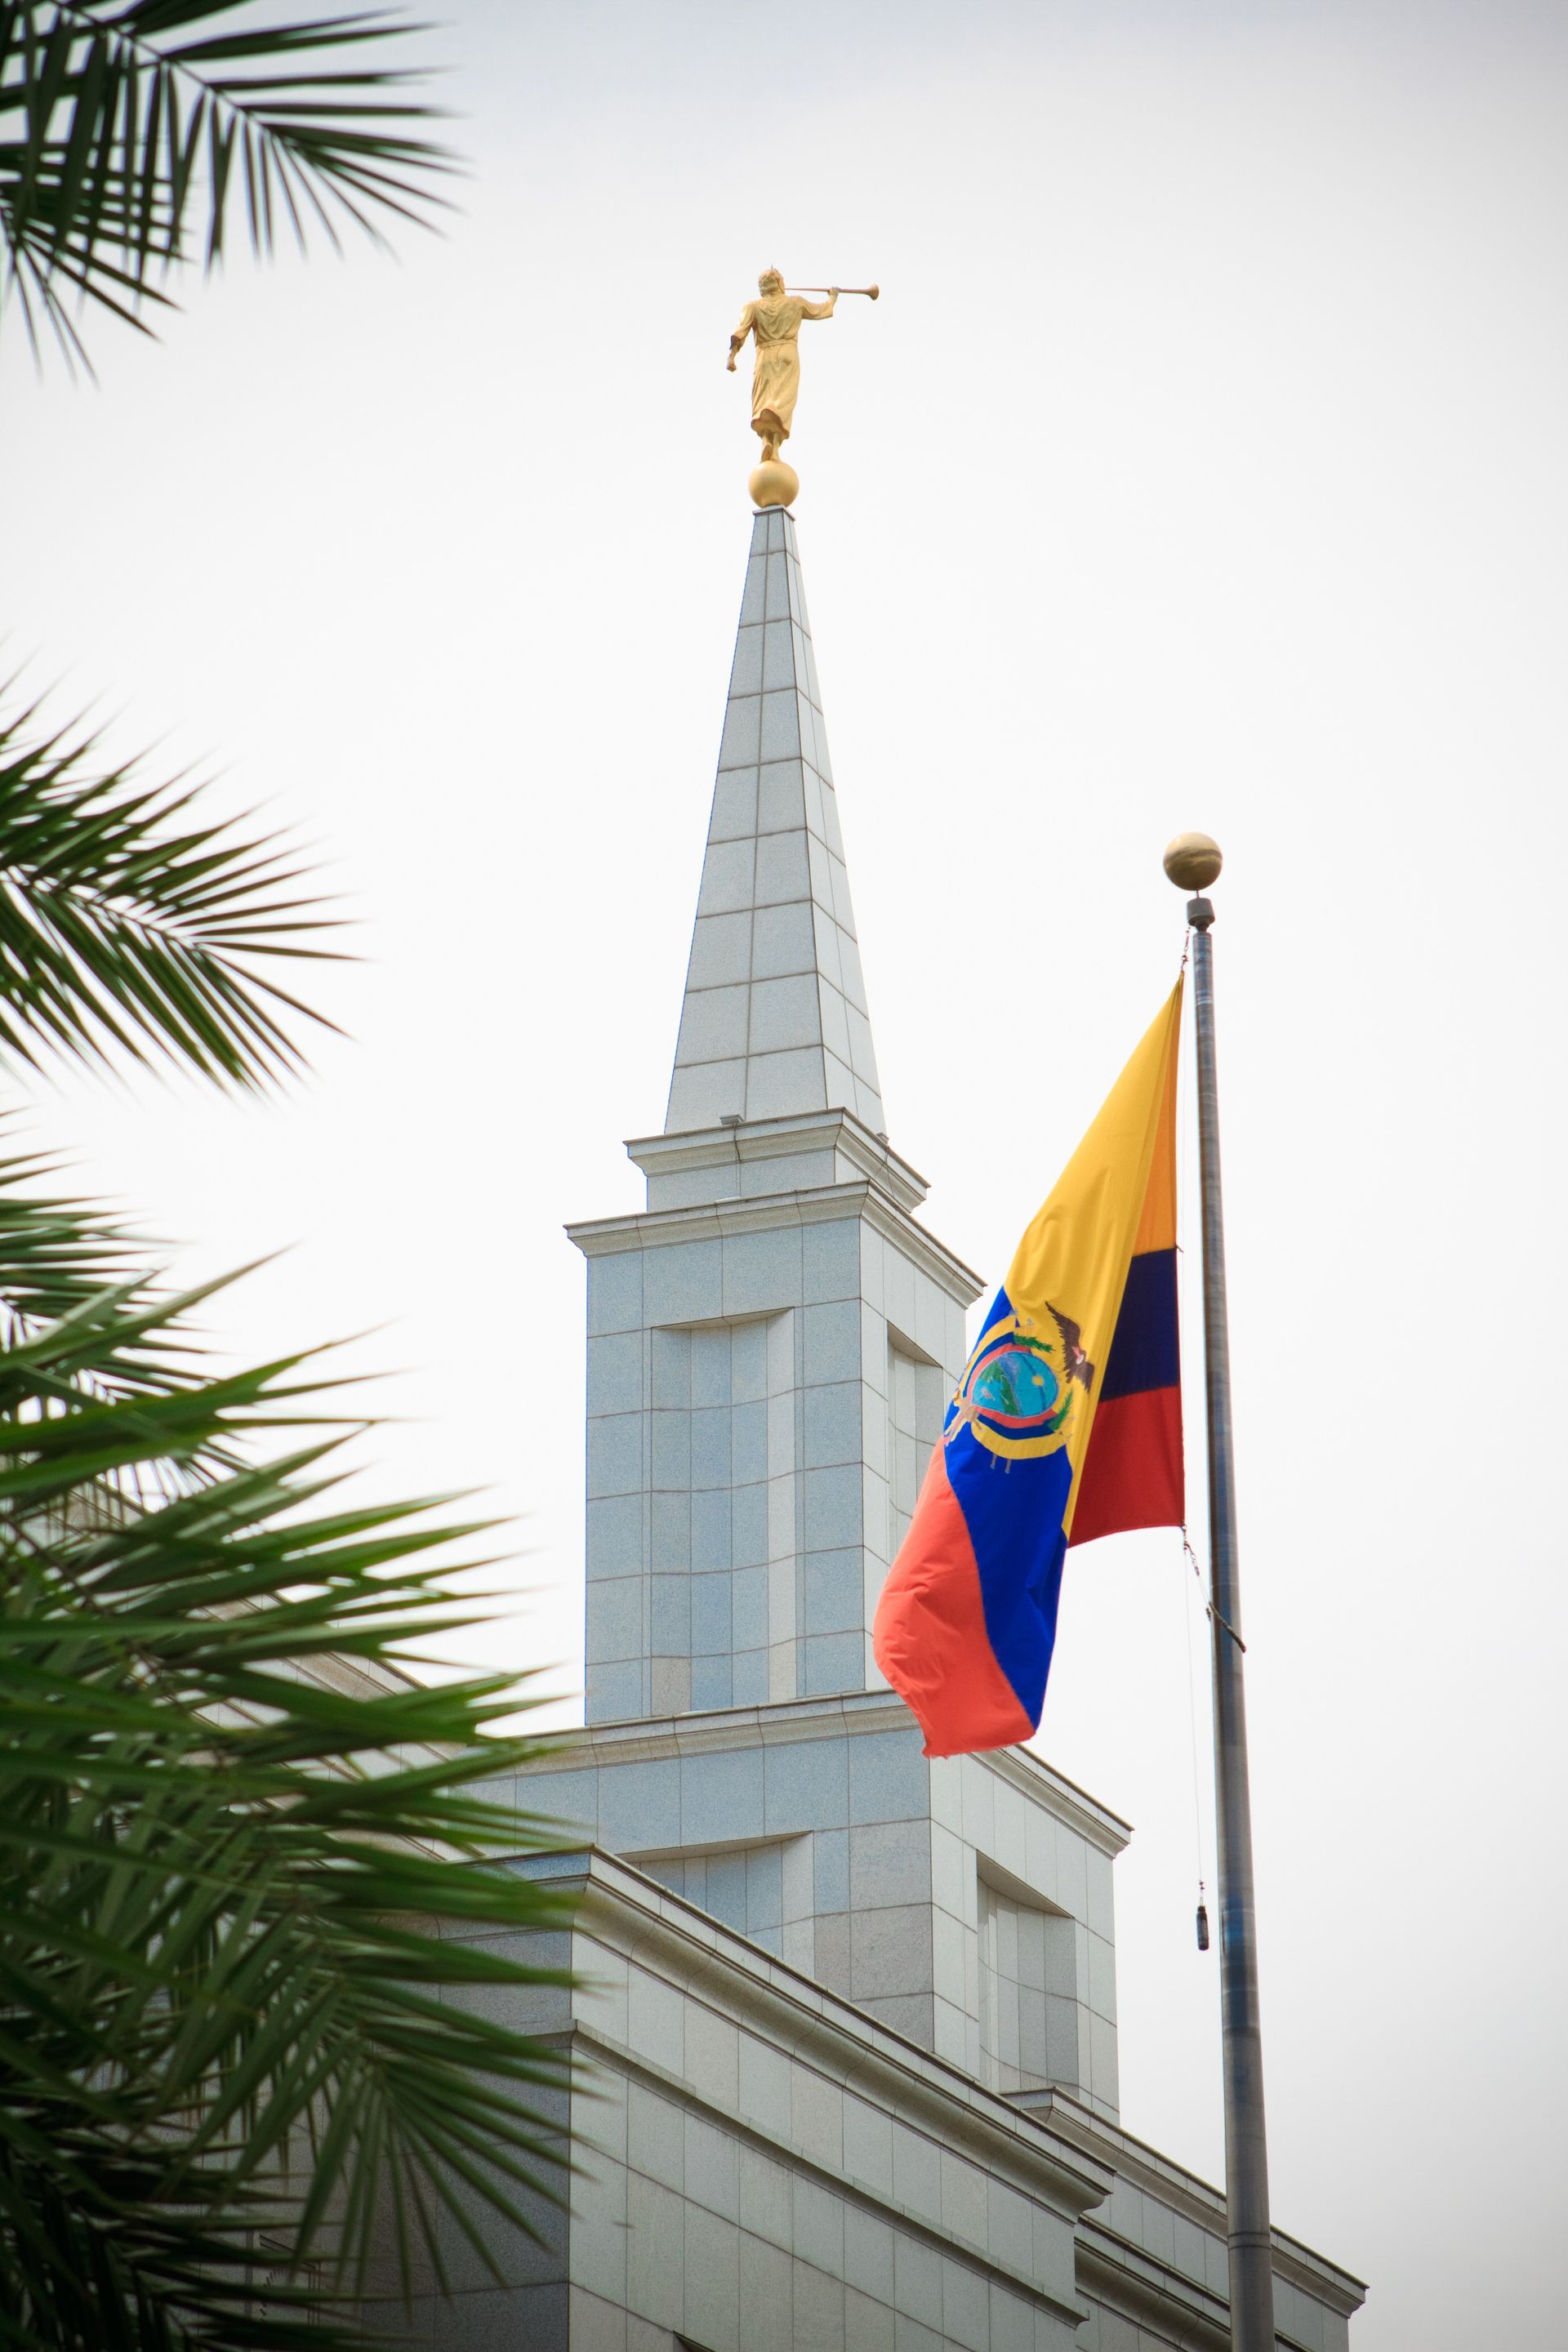 The angel Moroni stands on top of the spire of the Guayaquil Ecuador Temple.